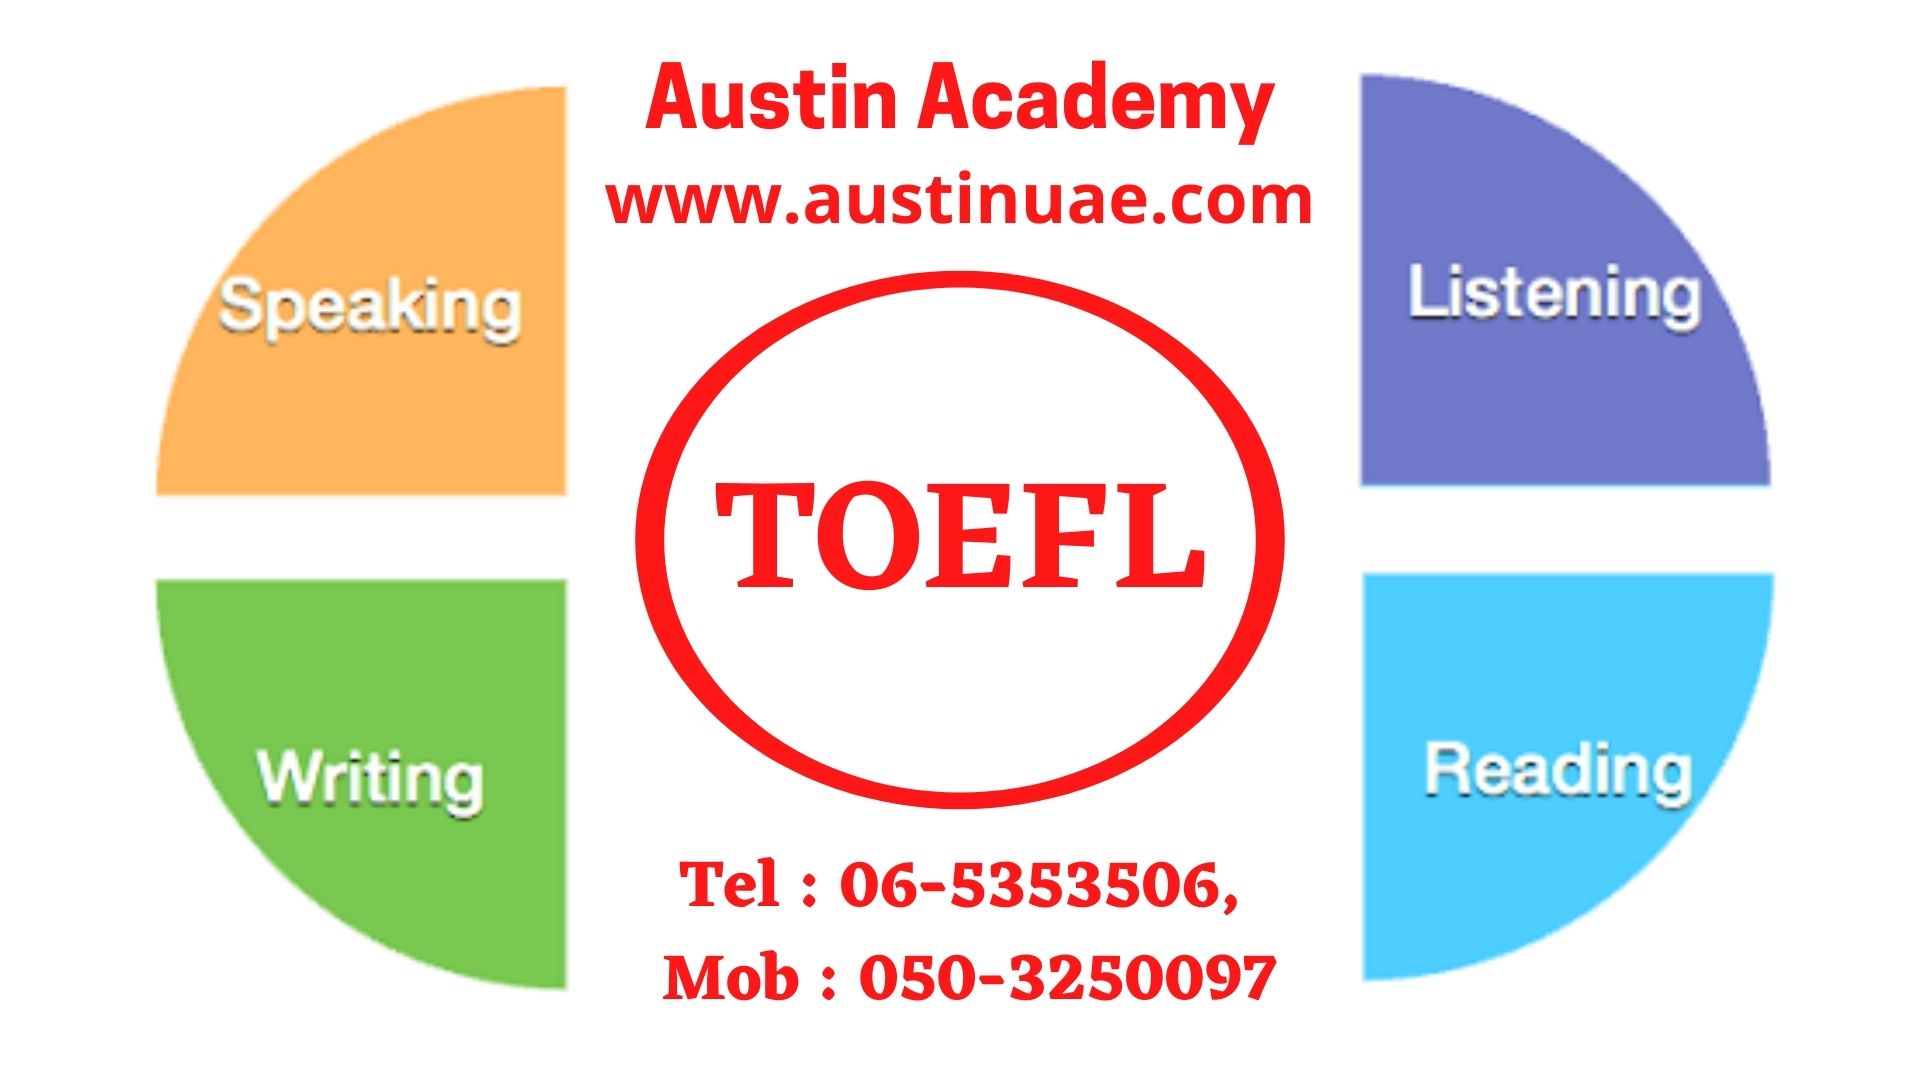 Toefl Classes In Sharjah With Best Offer 0503250097